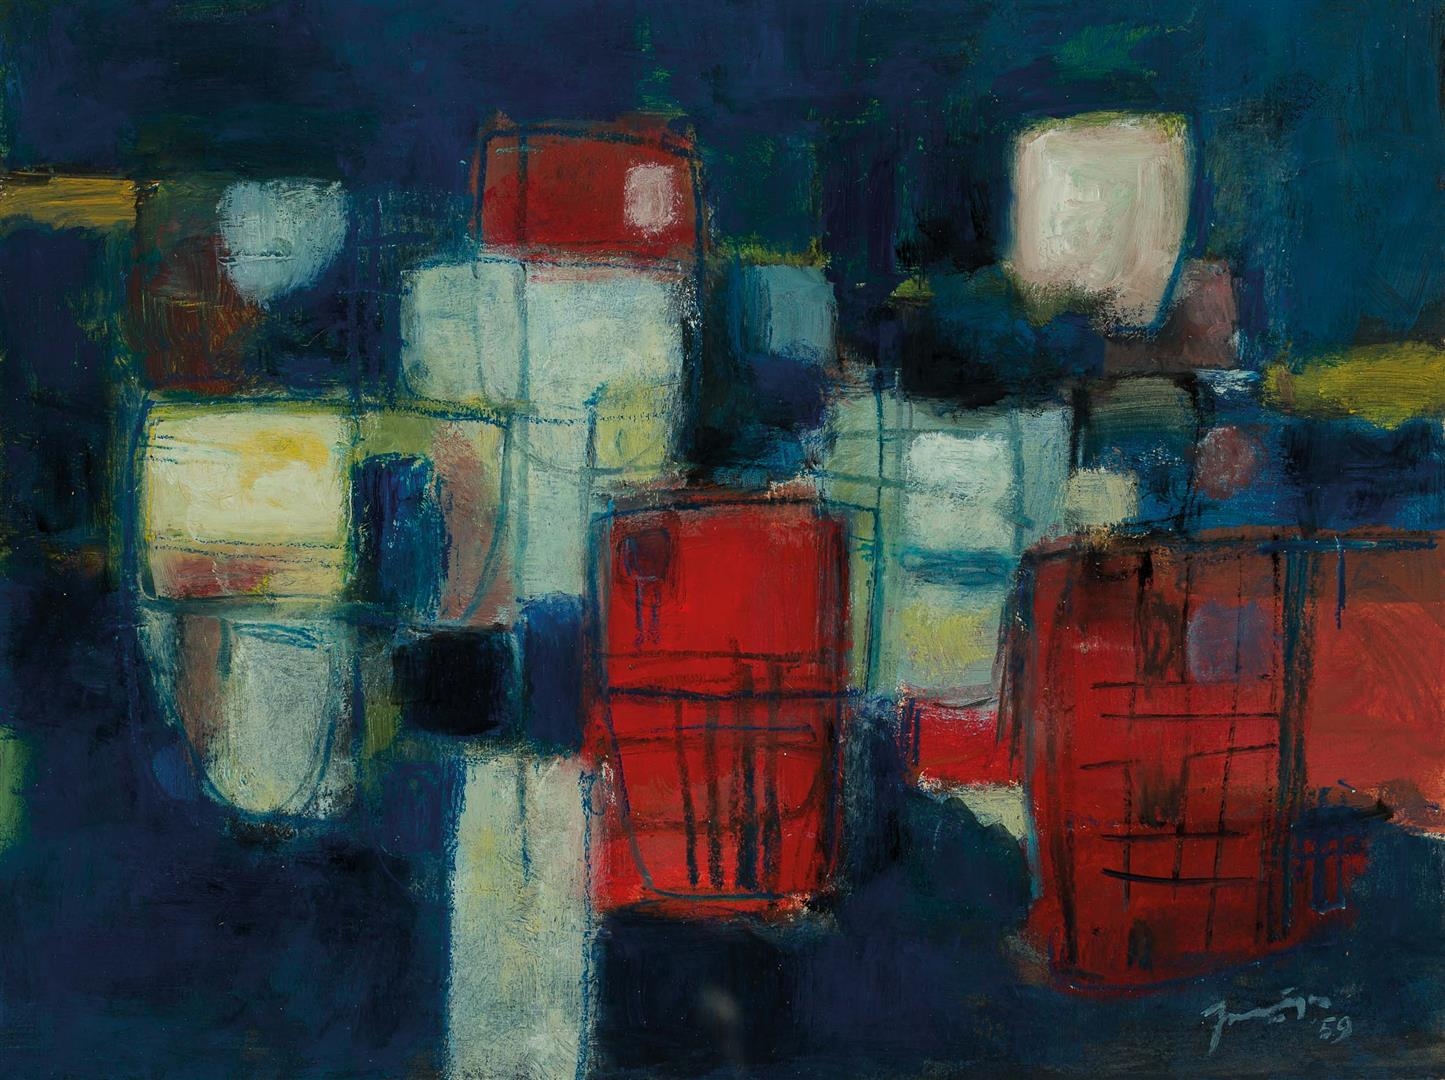 Composition by Jaap Nanninga, 1959